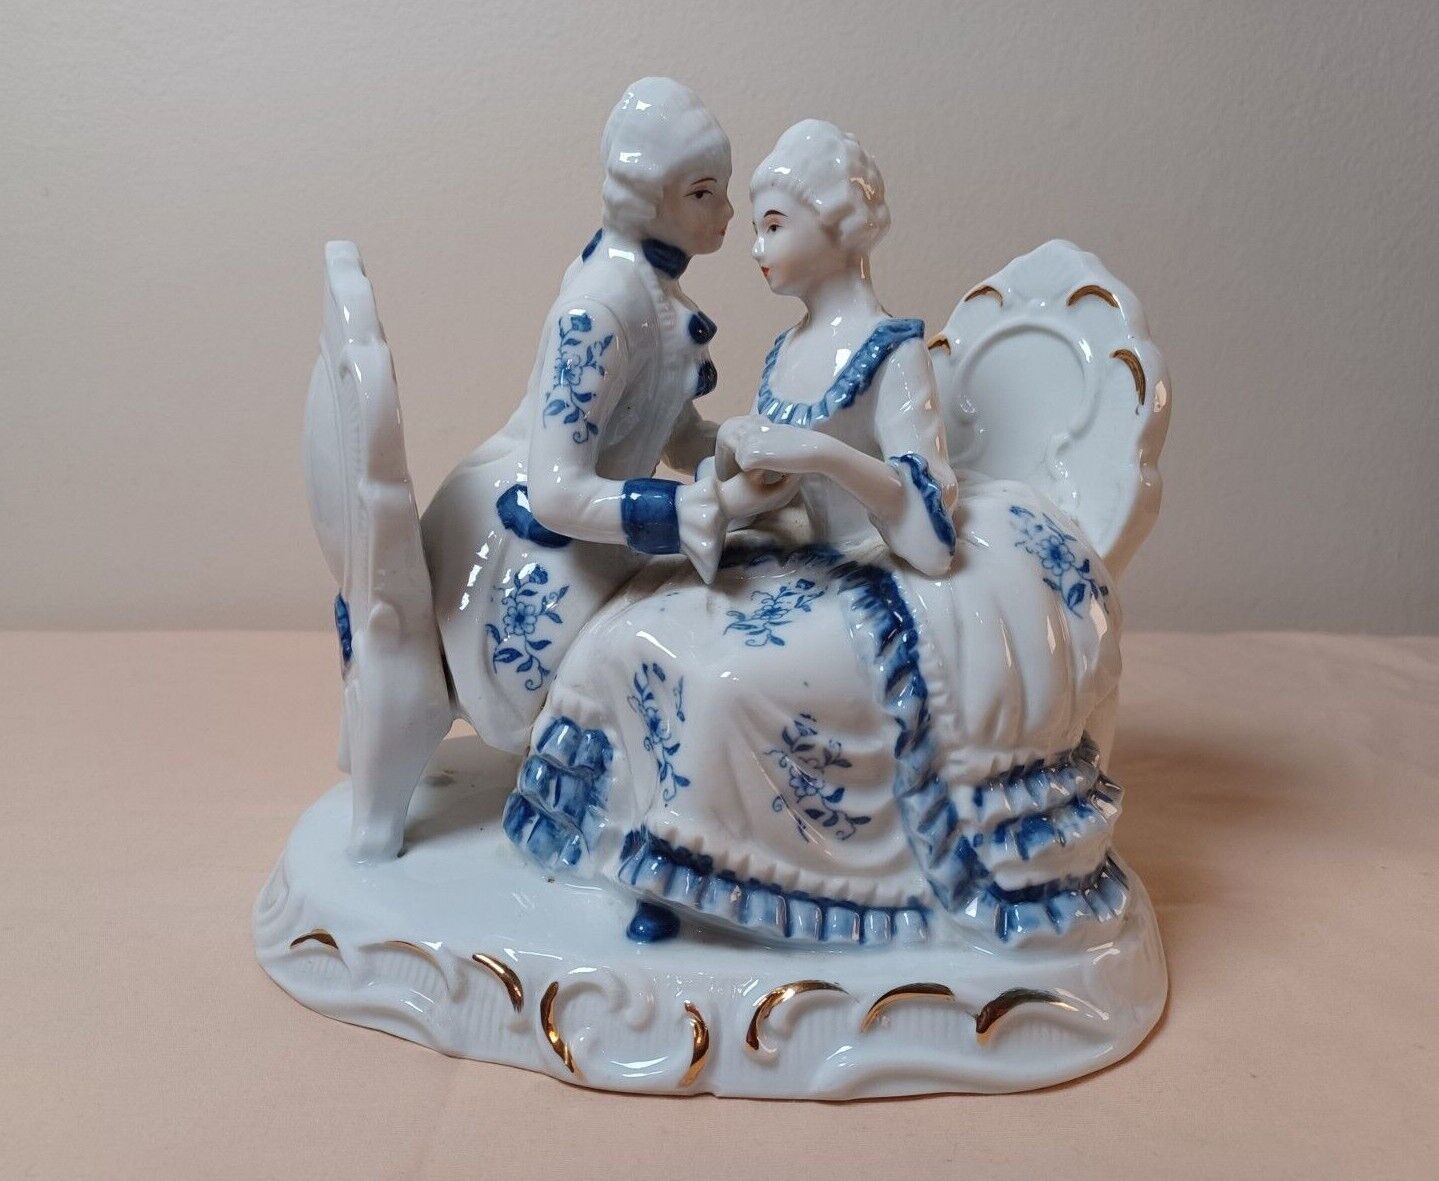 Ceramic sculptures/figurines - Colonial men/women/couples in white/blue/gold